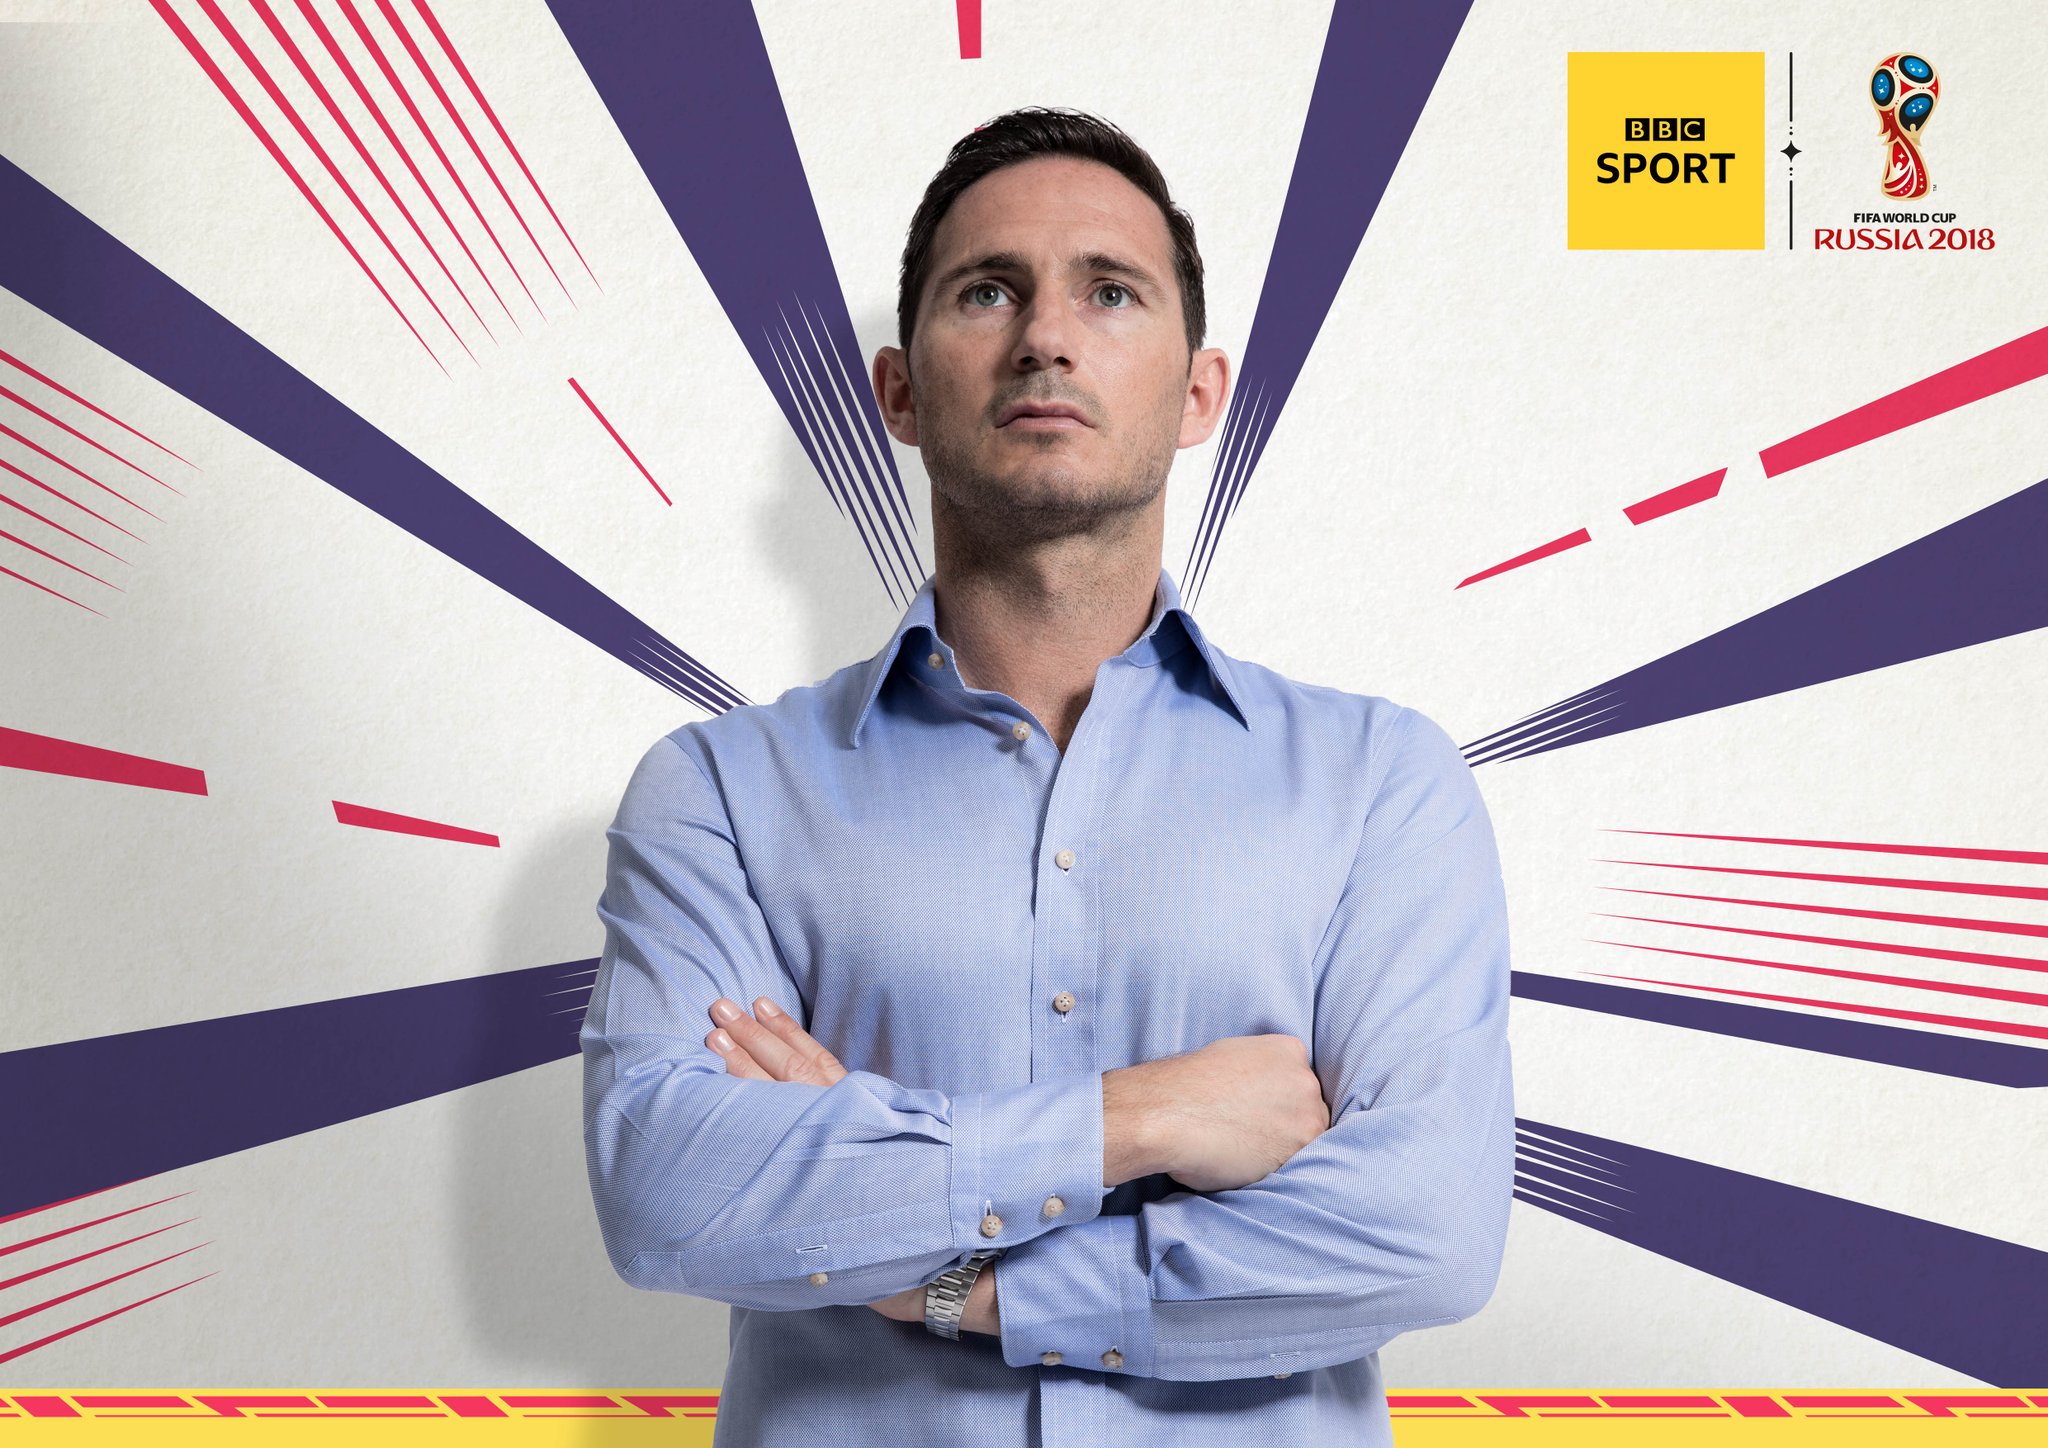 An incredible player...

And he can strike a good pose too! Happy birthday, Frank Lampard! 